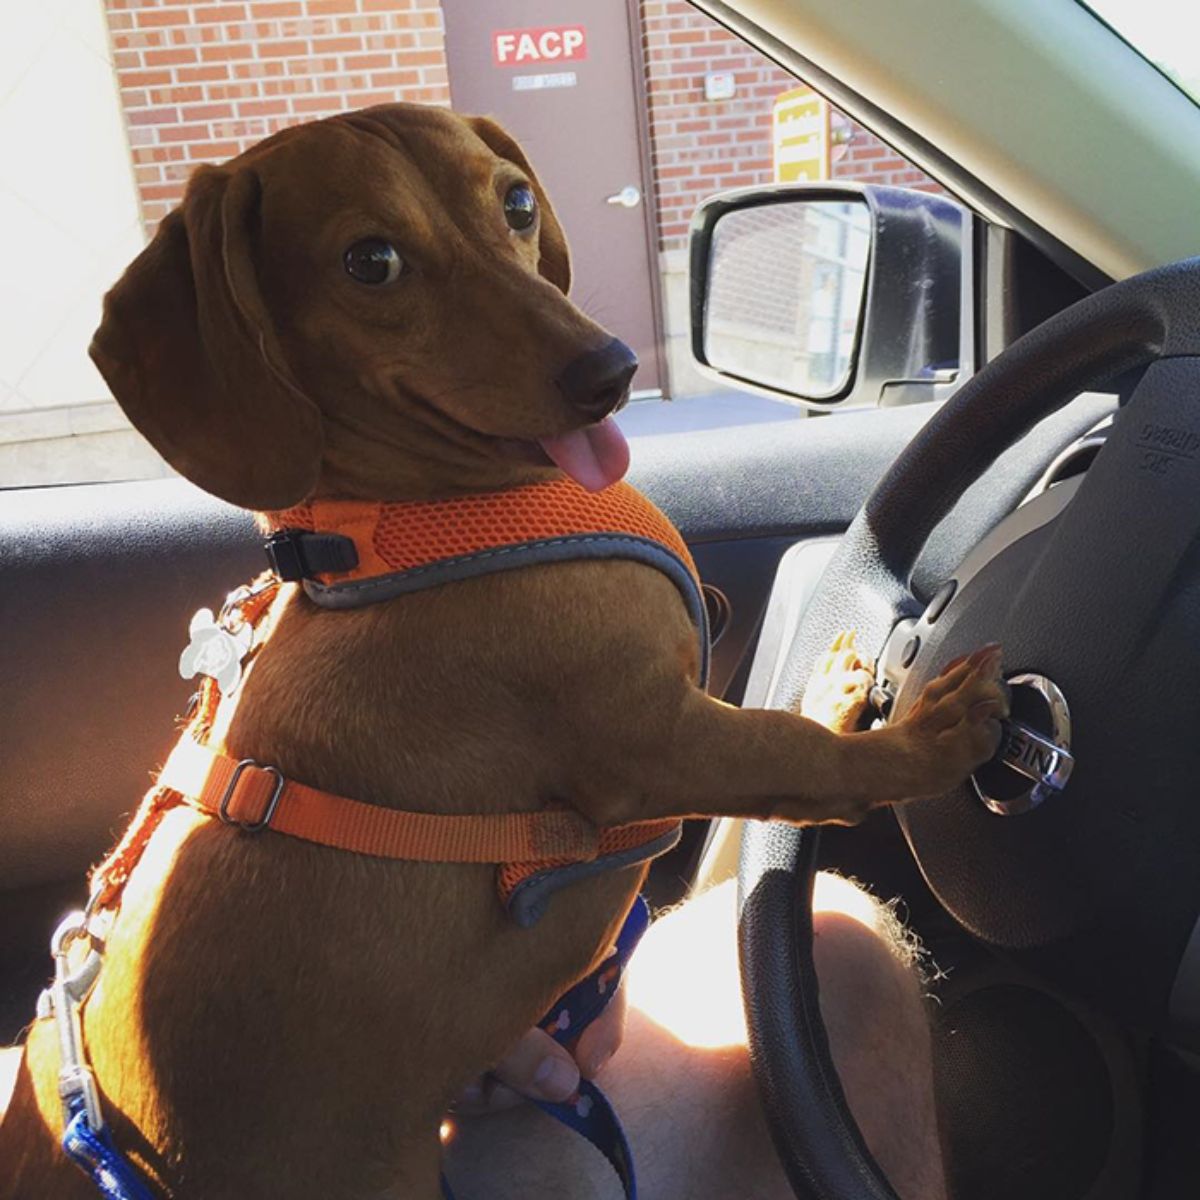 brown dachshund with orange harness and tongue hanging out standing on hind legs of a driver's seat with the front paws on the steering wheel